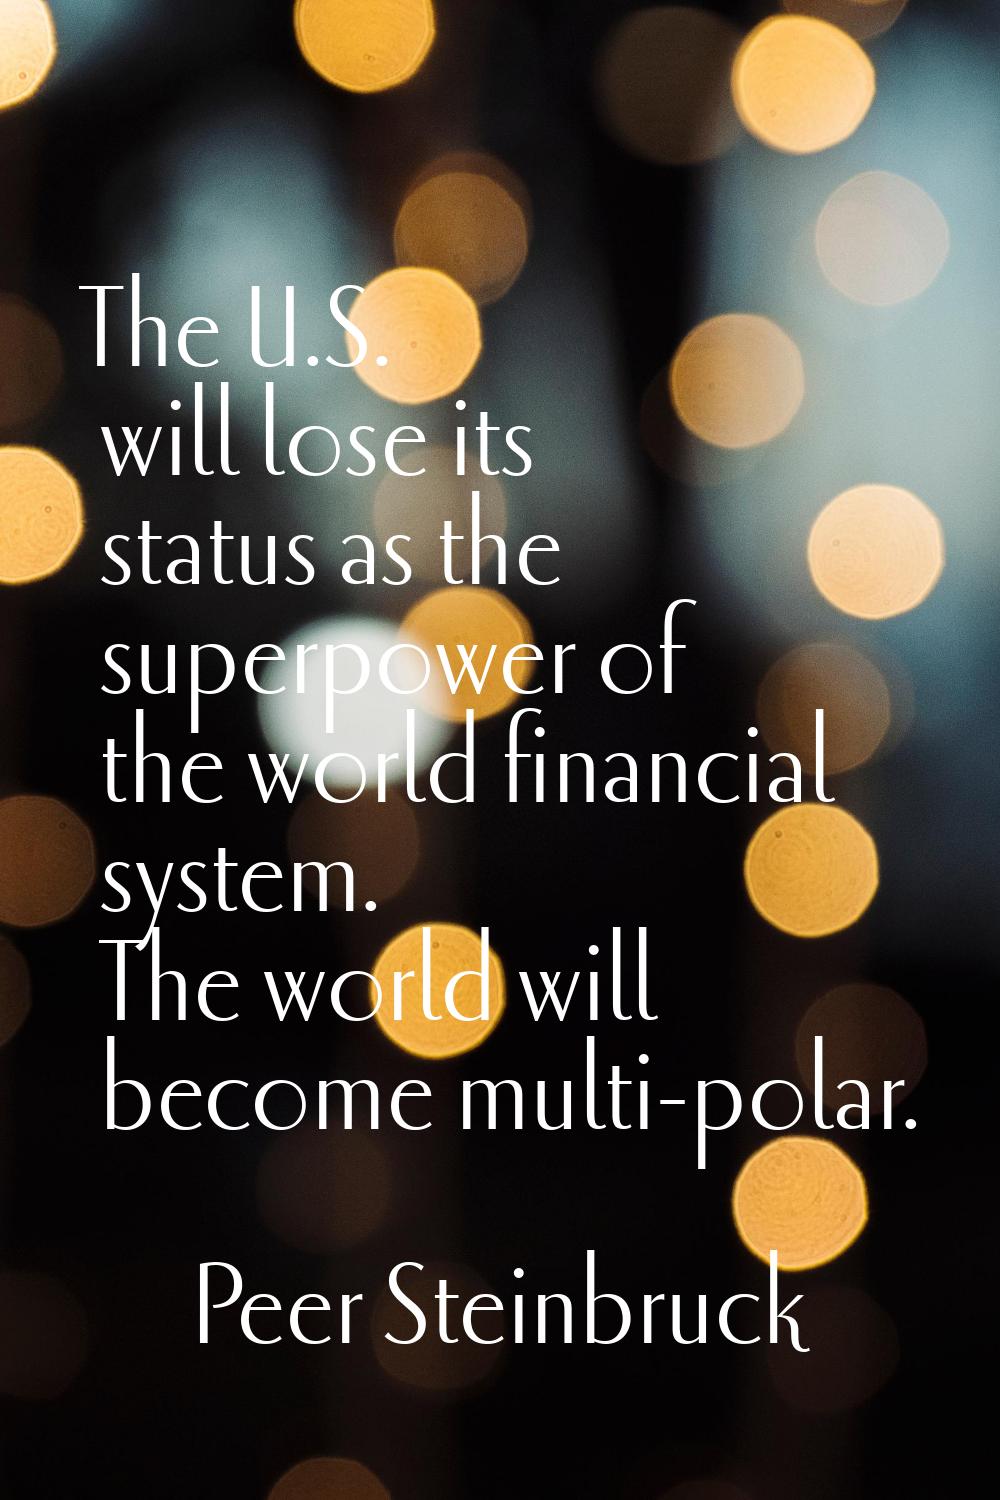 The U.S. will lose its status as the superpower of the world financial system. The world will becom